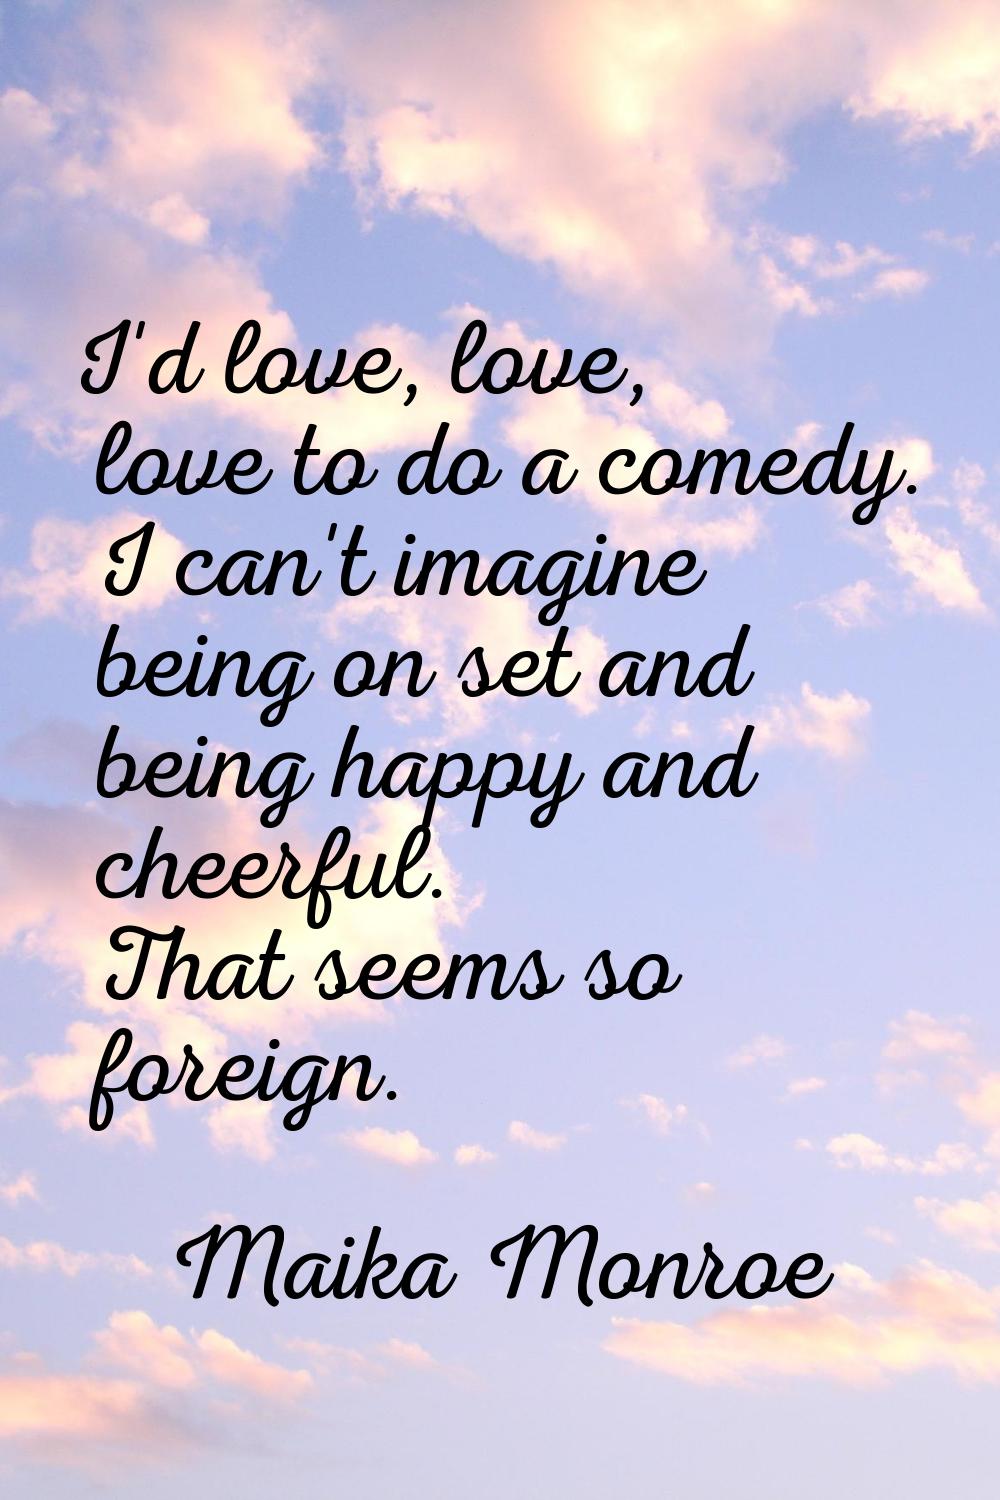 I'd love, love, love to do a comedy. I can't imagine being on set and being happy and cheerful. Tha